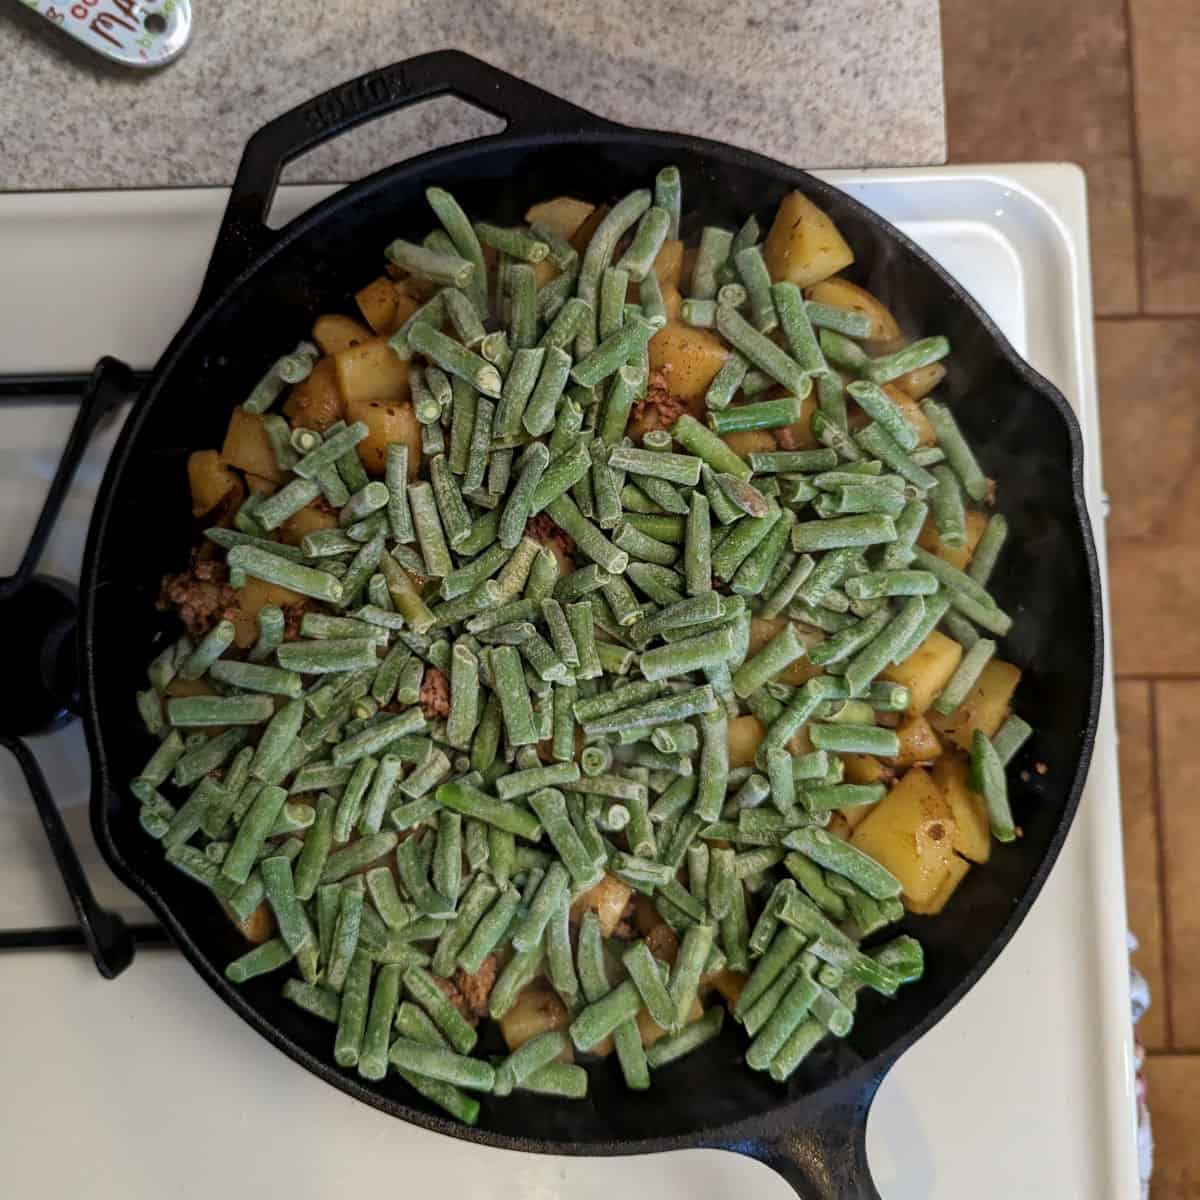 frozen green beans layered on potatoes in a cast iron skillet